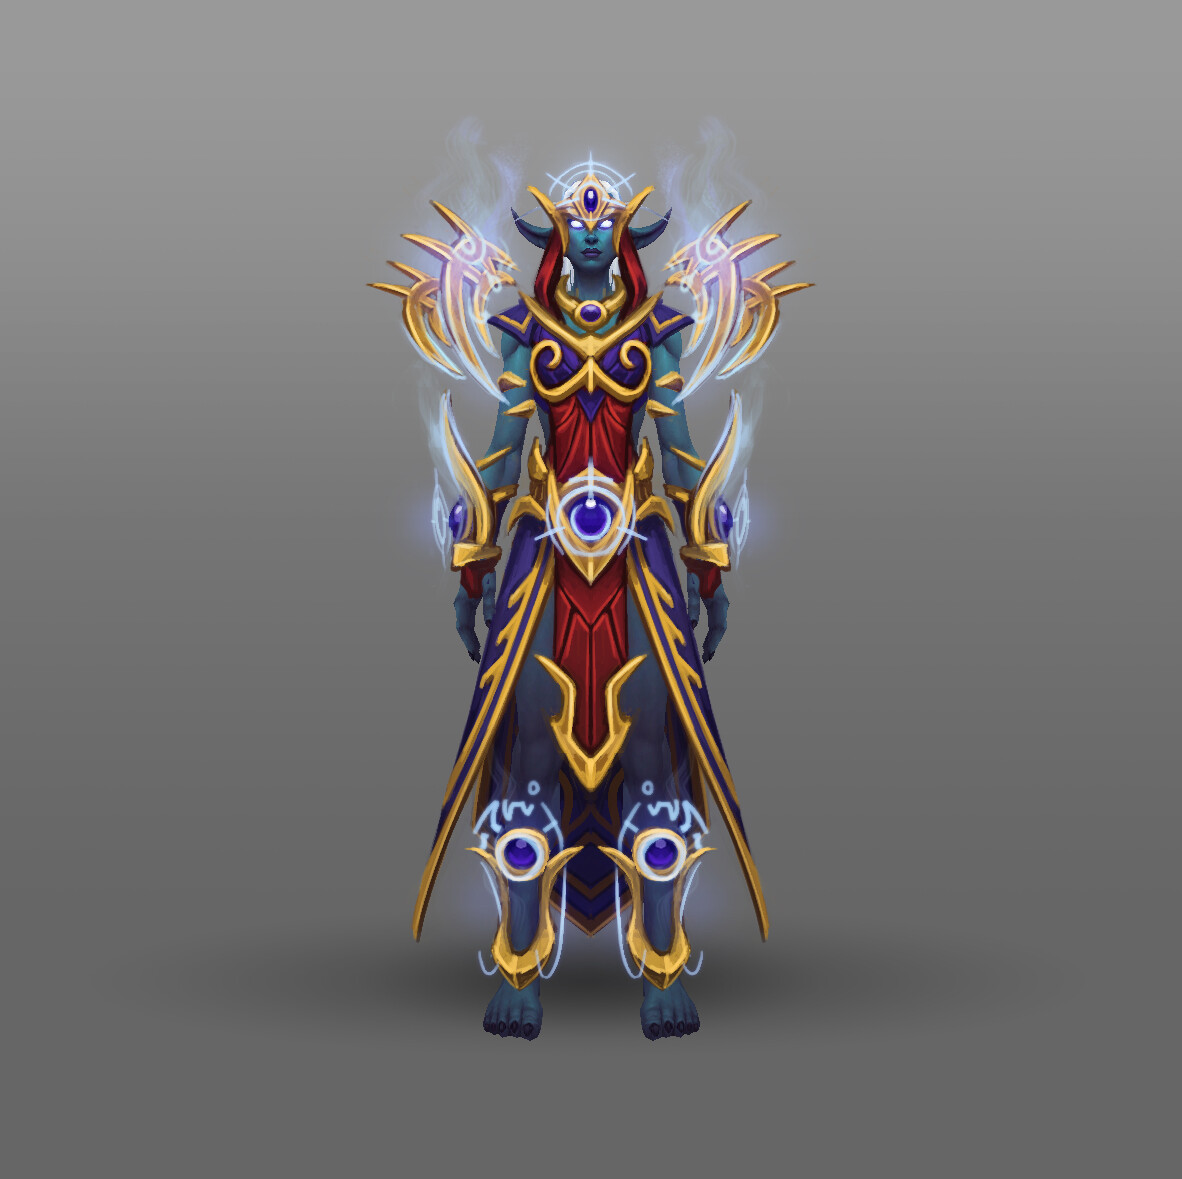 Mage
Inspired by some nightborne gear as well as Grand Magistrix Elisande